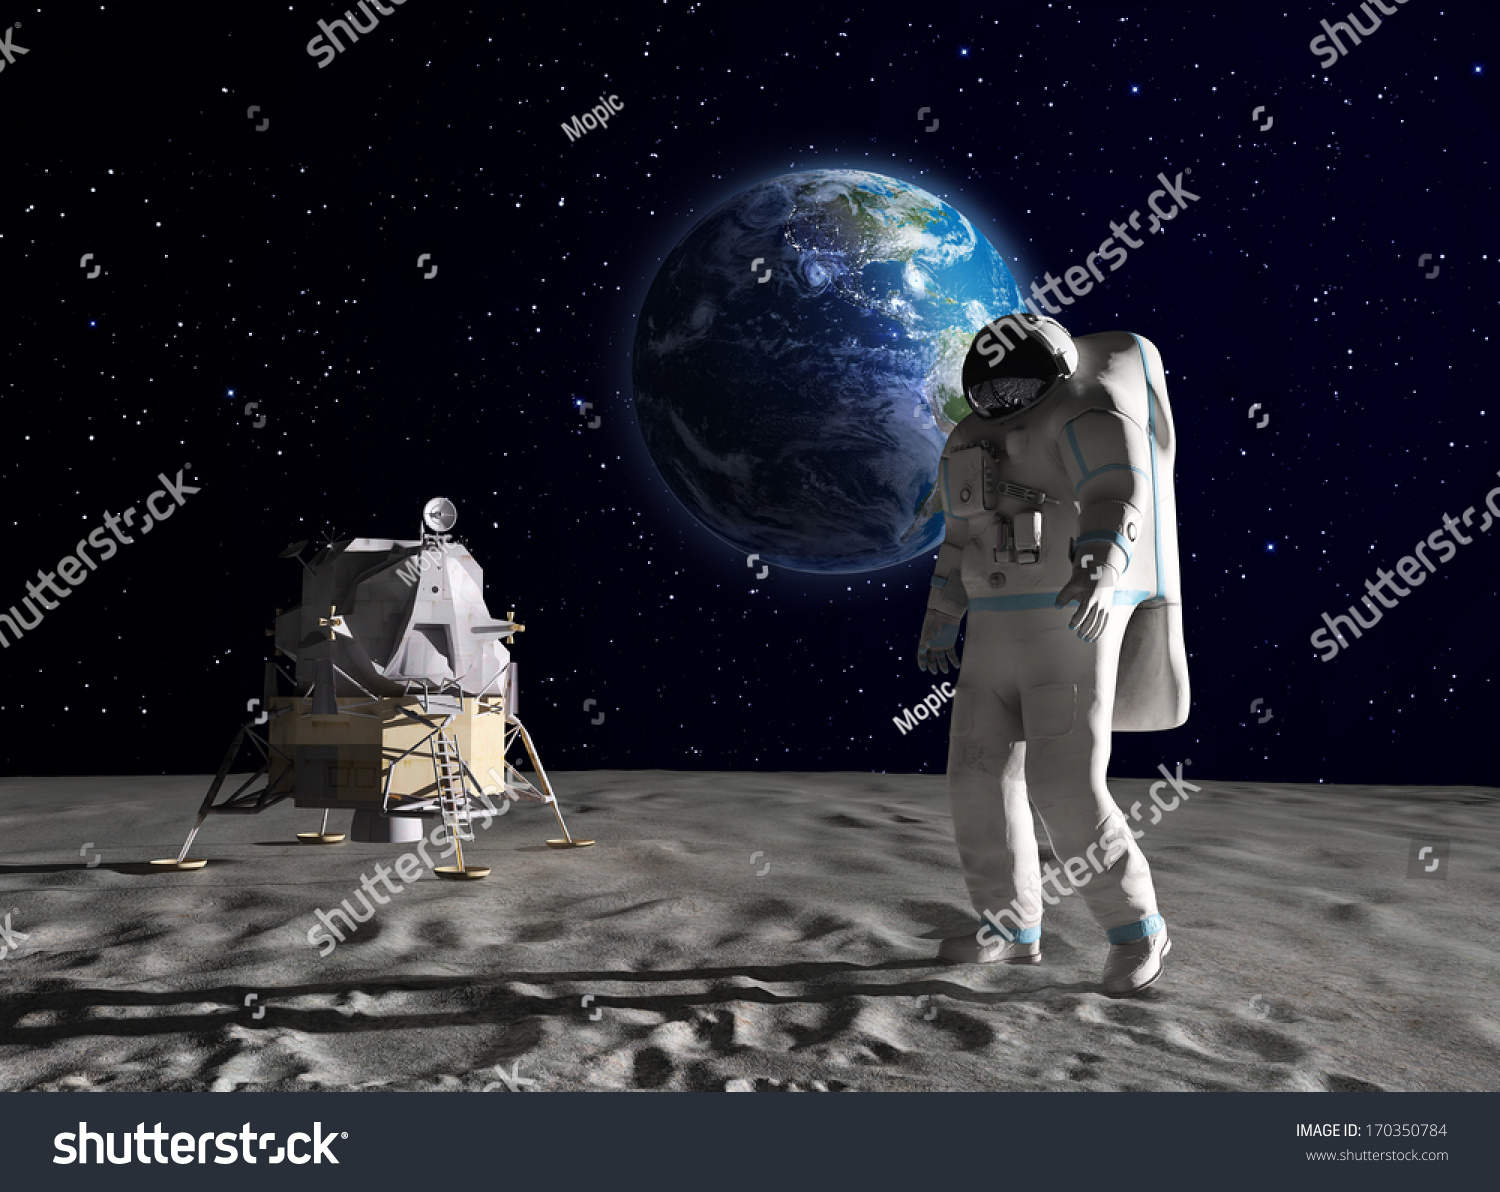 An astronaut on the surface of the Moon #170350784